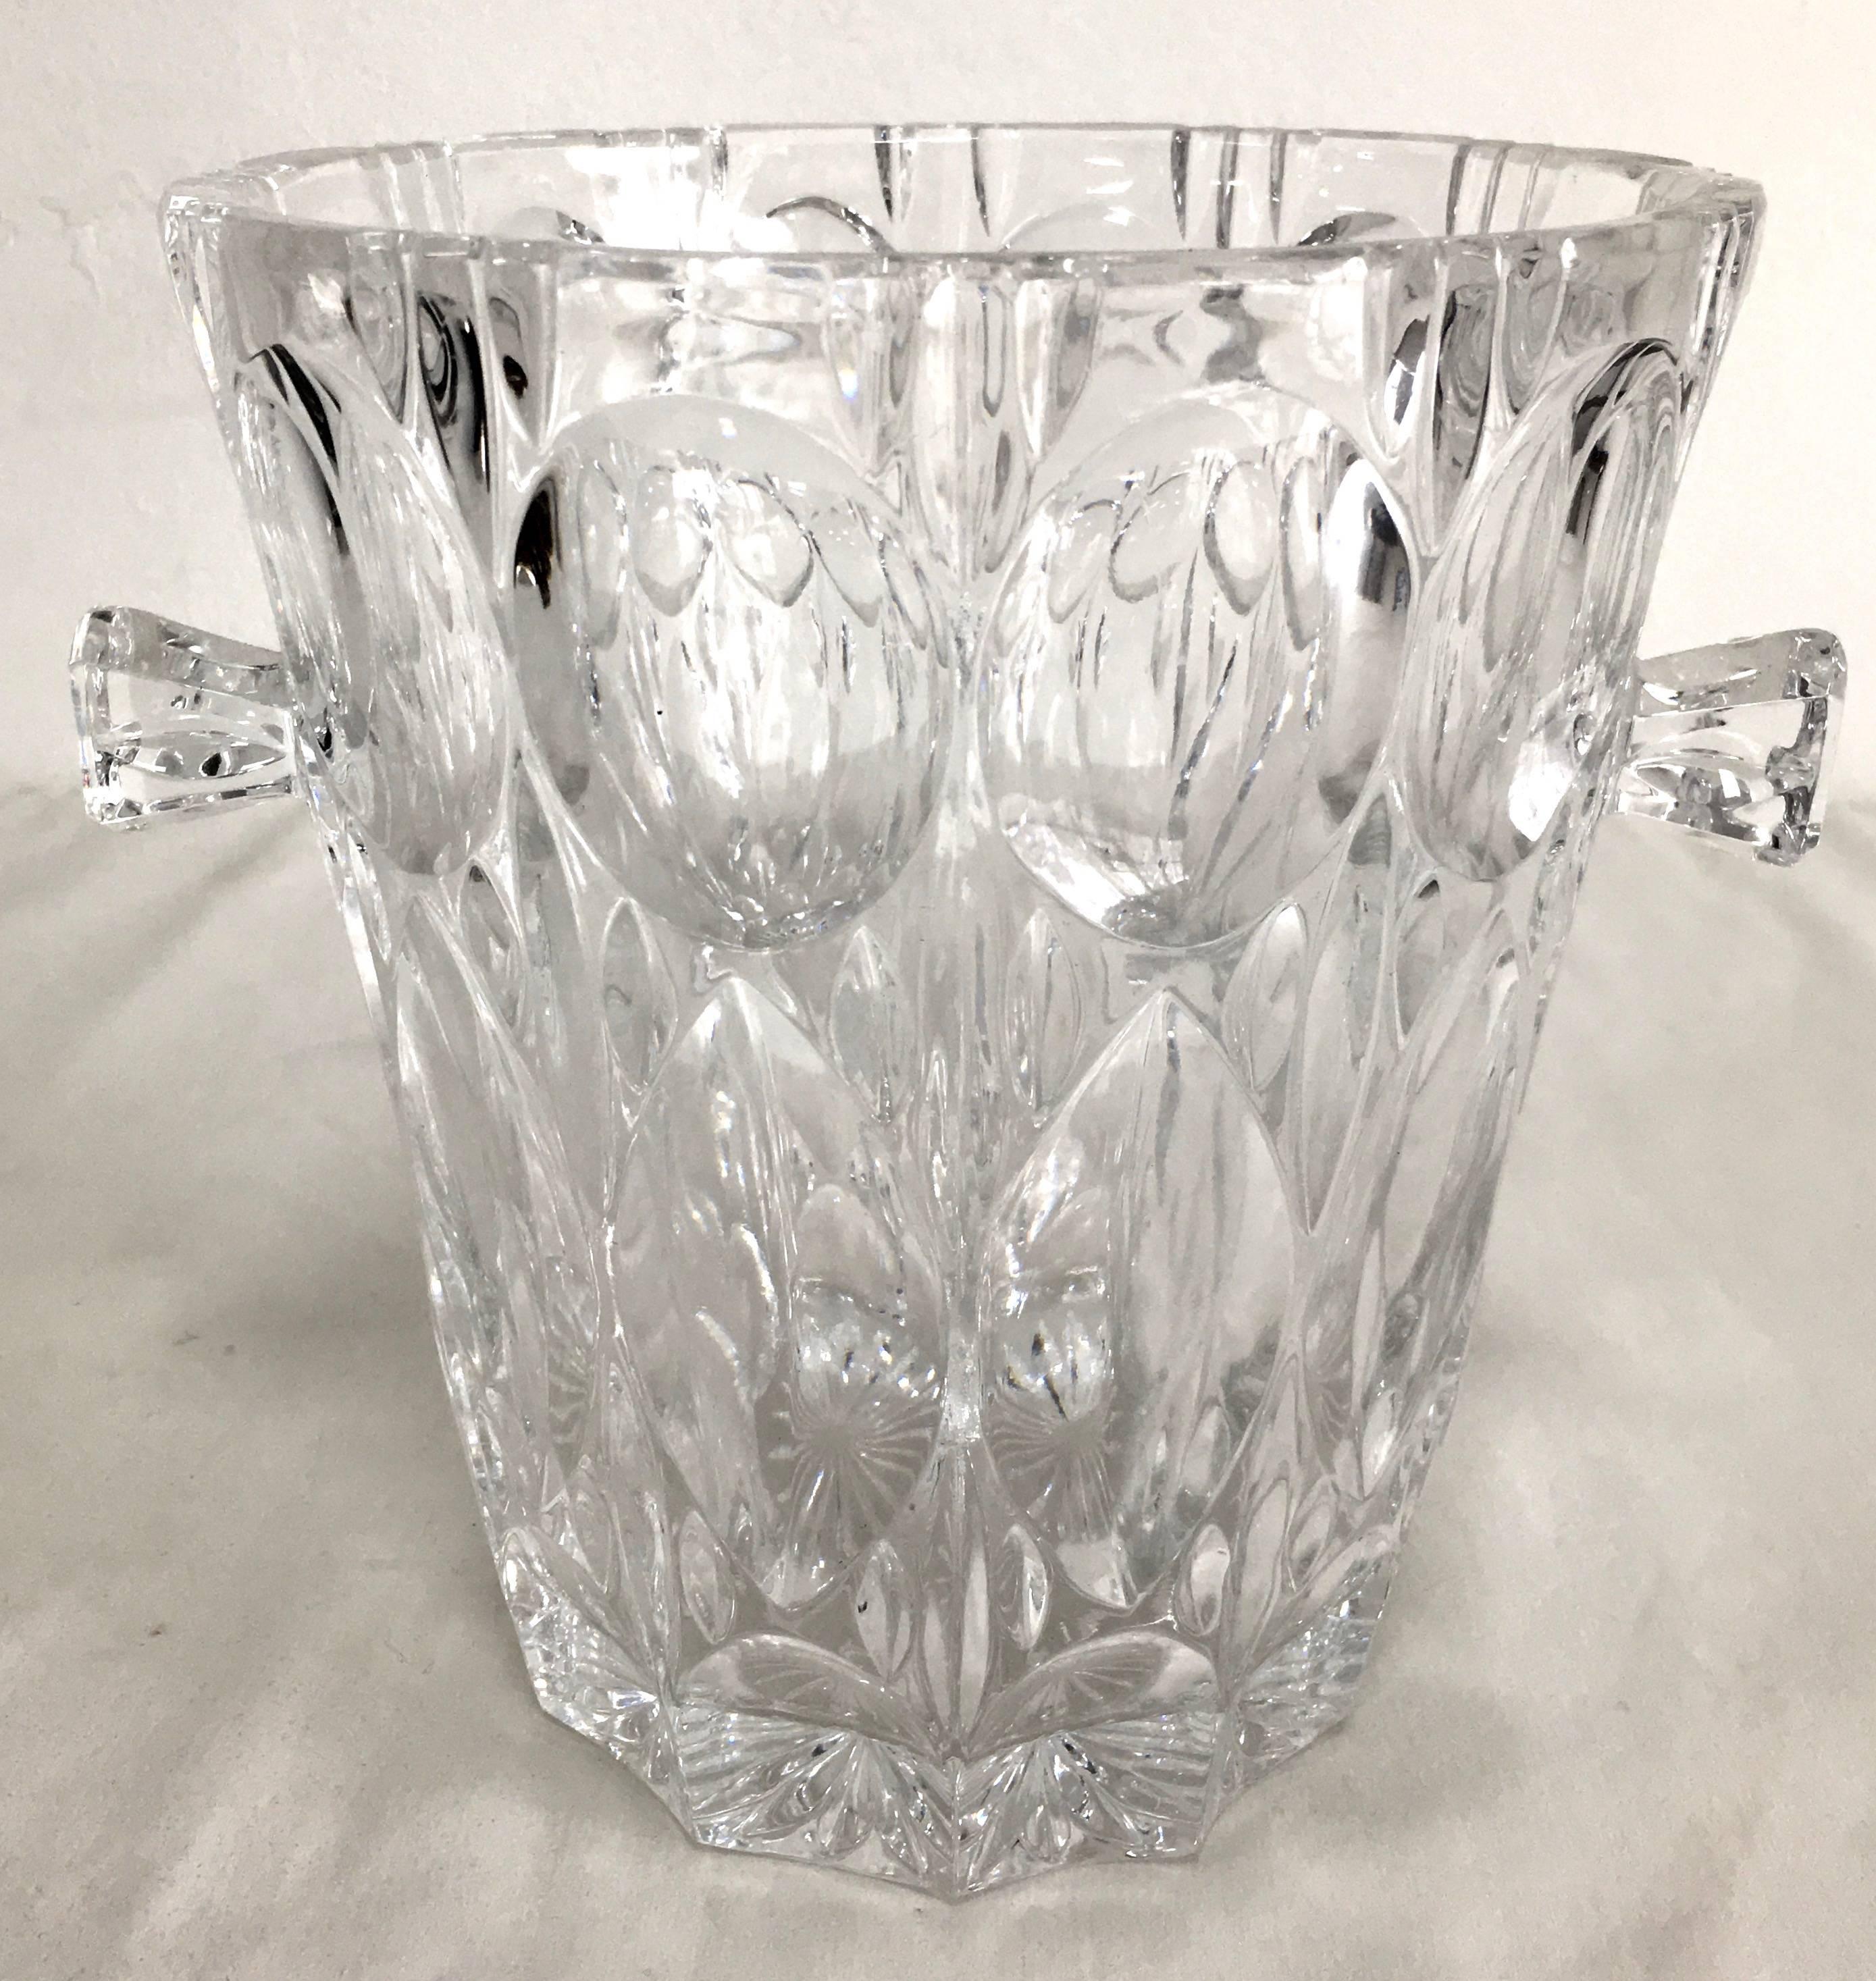 Crystal ice bucket with handles - celebrate with sophistication - a compliment to any bar - holds any bottle of wine or Champagne.